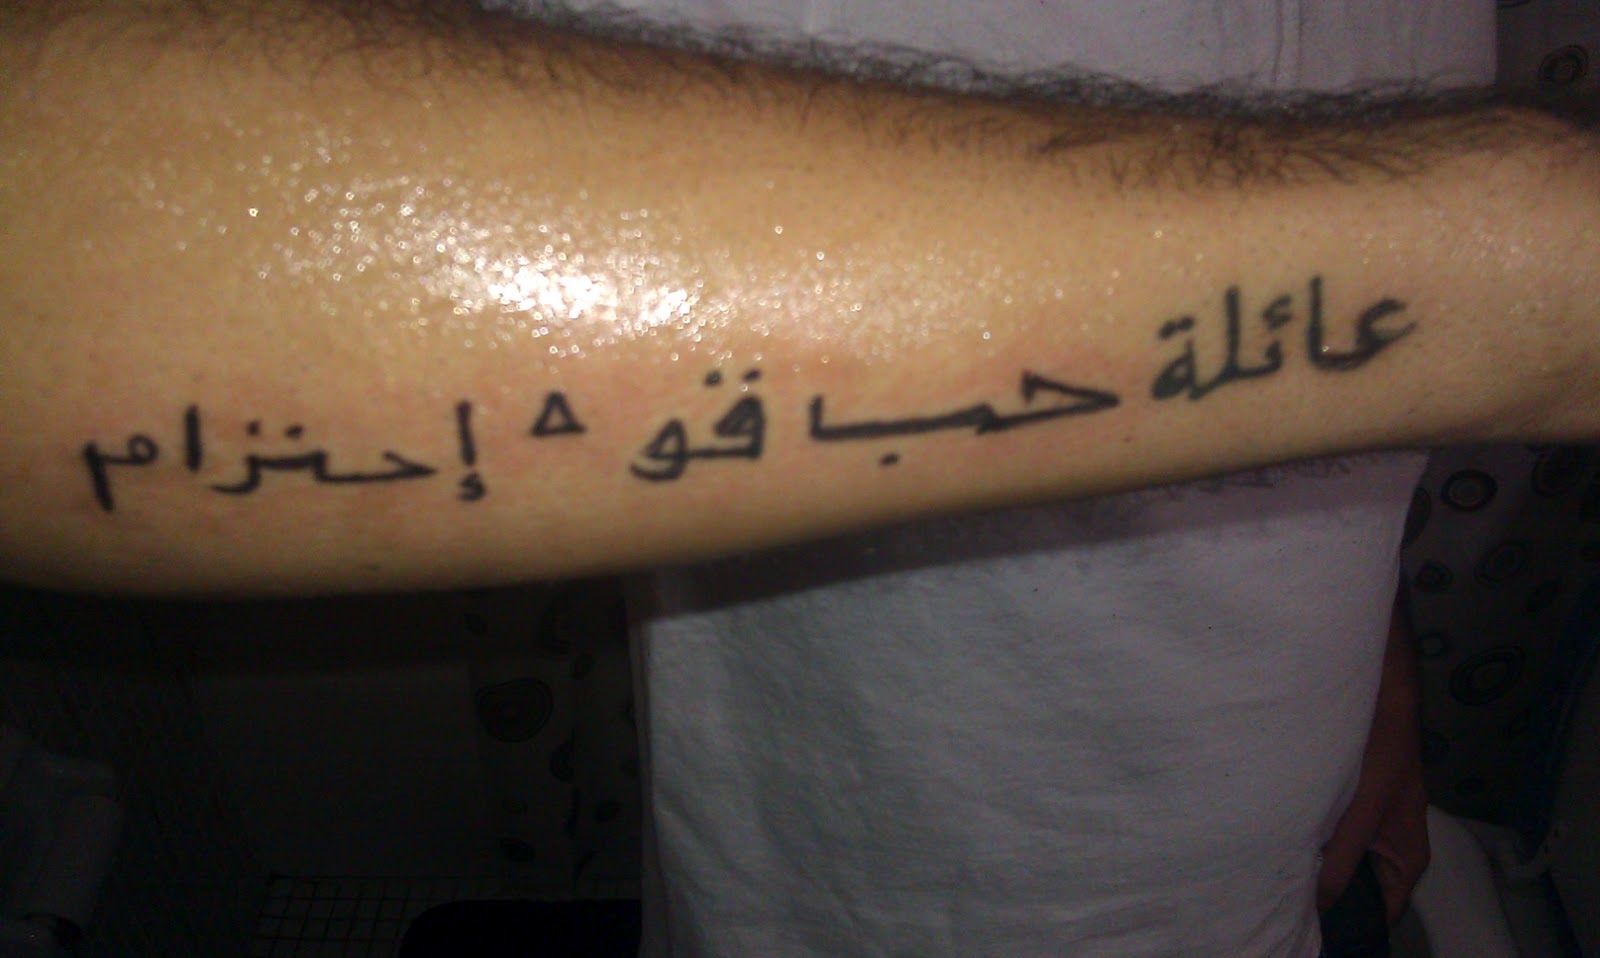 70 Meaningful Arabic Tattoos and Designs That Will Inspire You to Get One   Tattoo Me Now